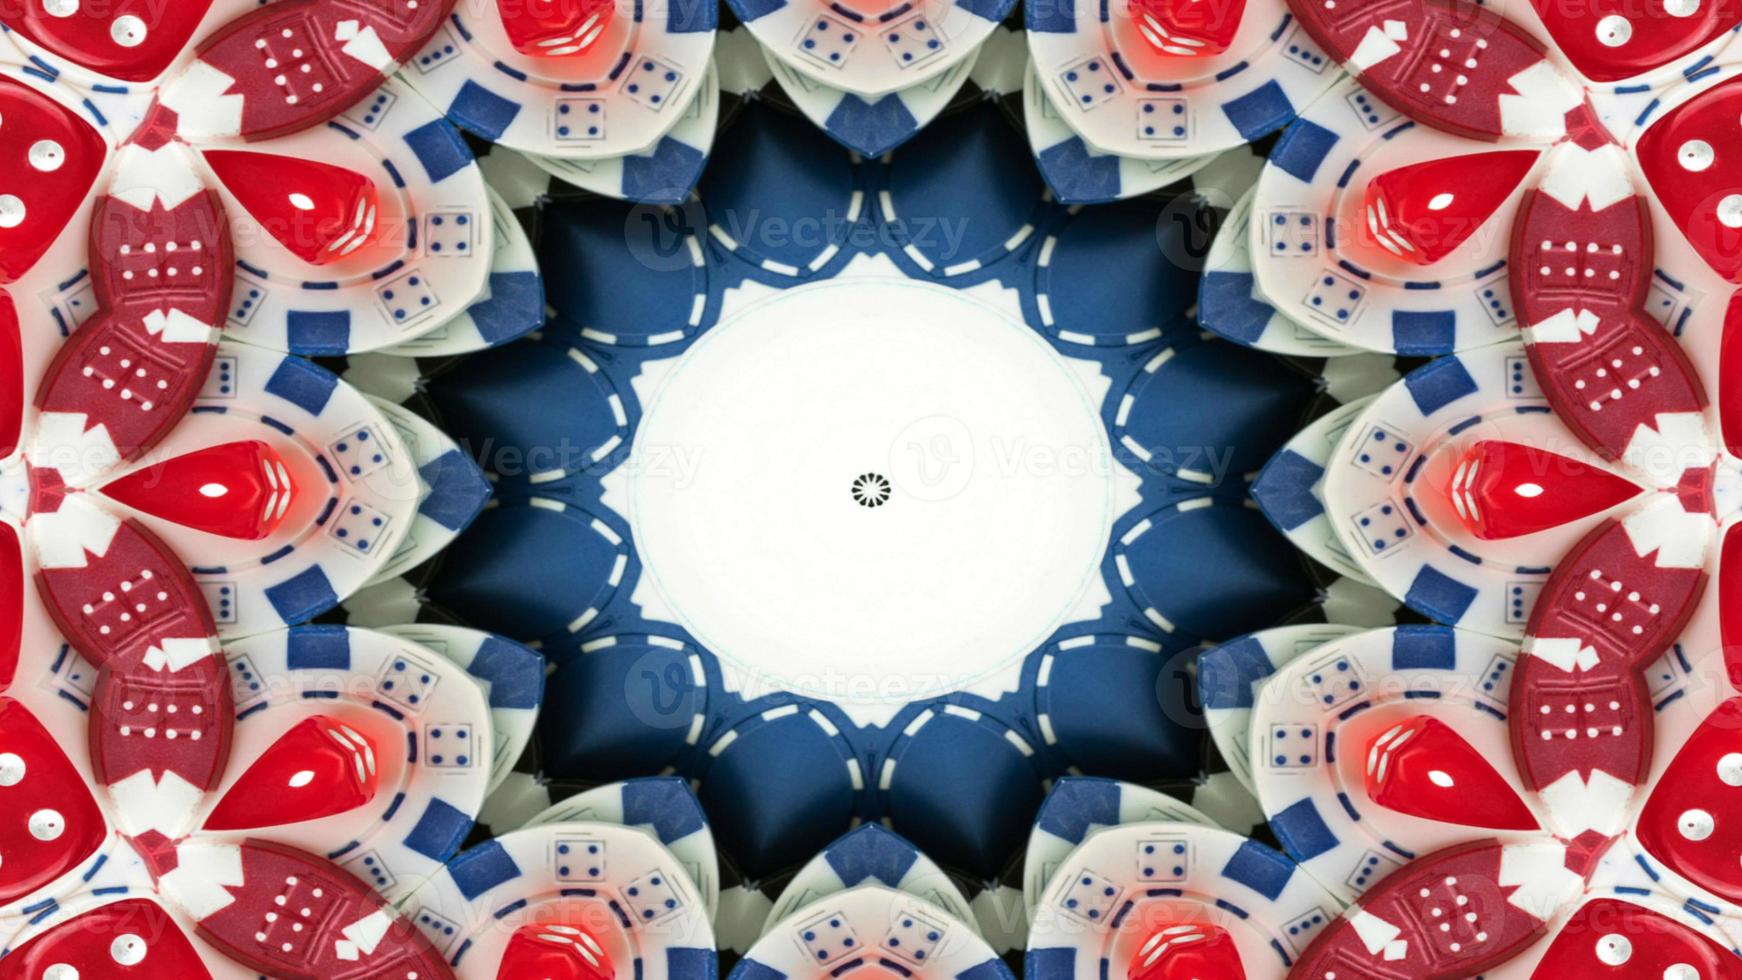 Gambling Dices and Chips Kaleidoscope photo